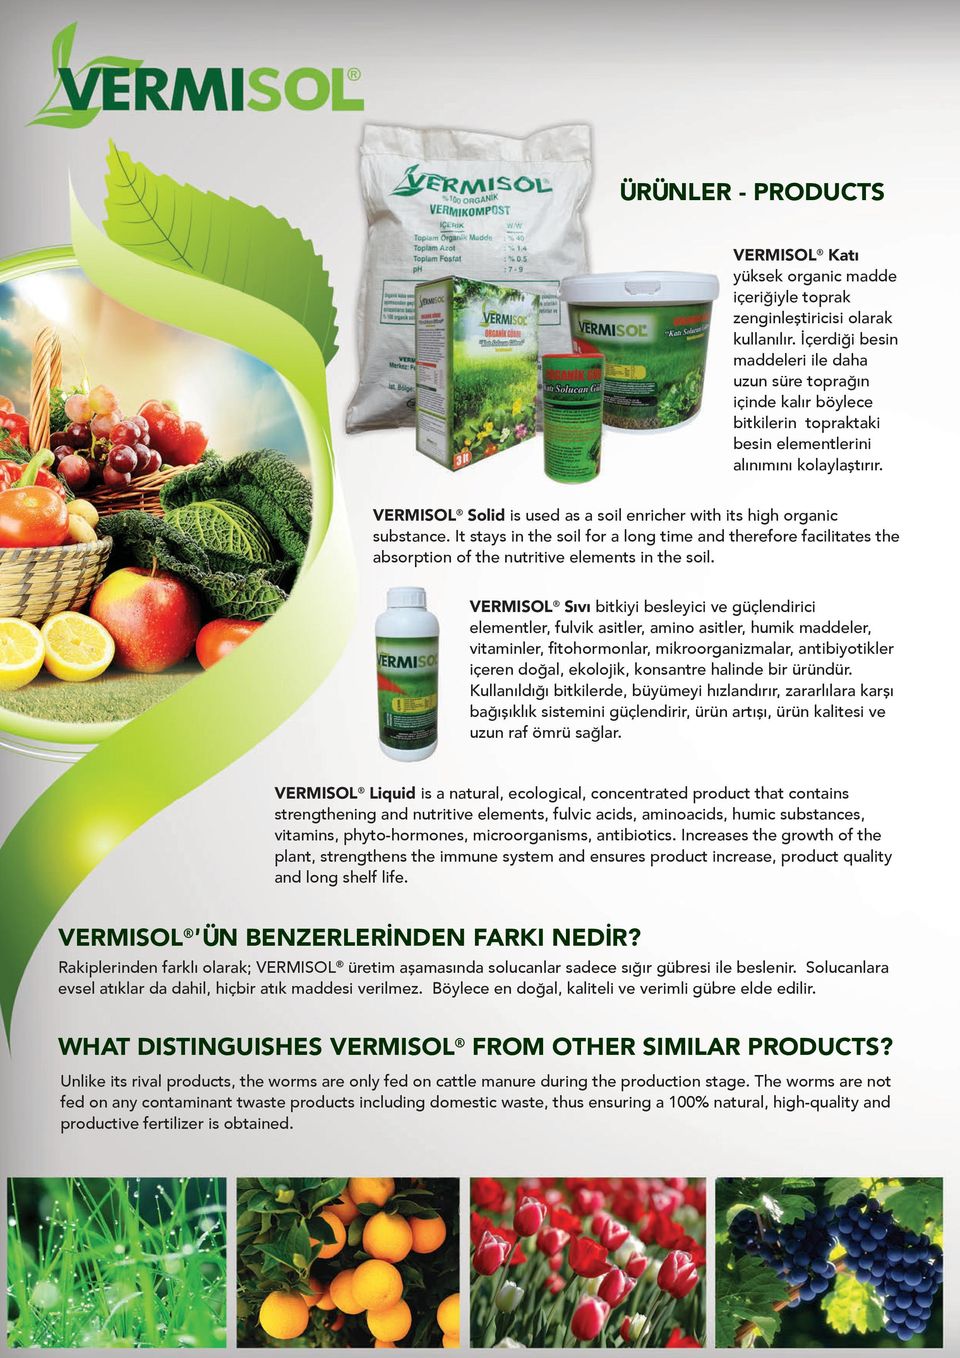 VERMISOL Solid is used as a soil enricher with its high organic substance. It stays in the soil for a long time and therefore facilitates the absorption of the nutritive elements in the soil.